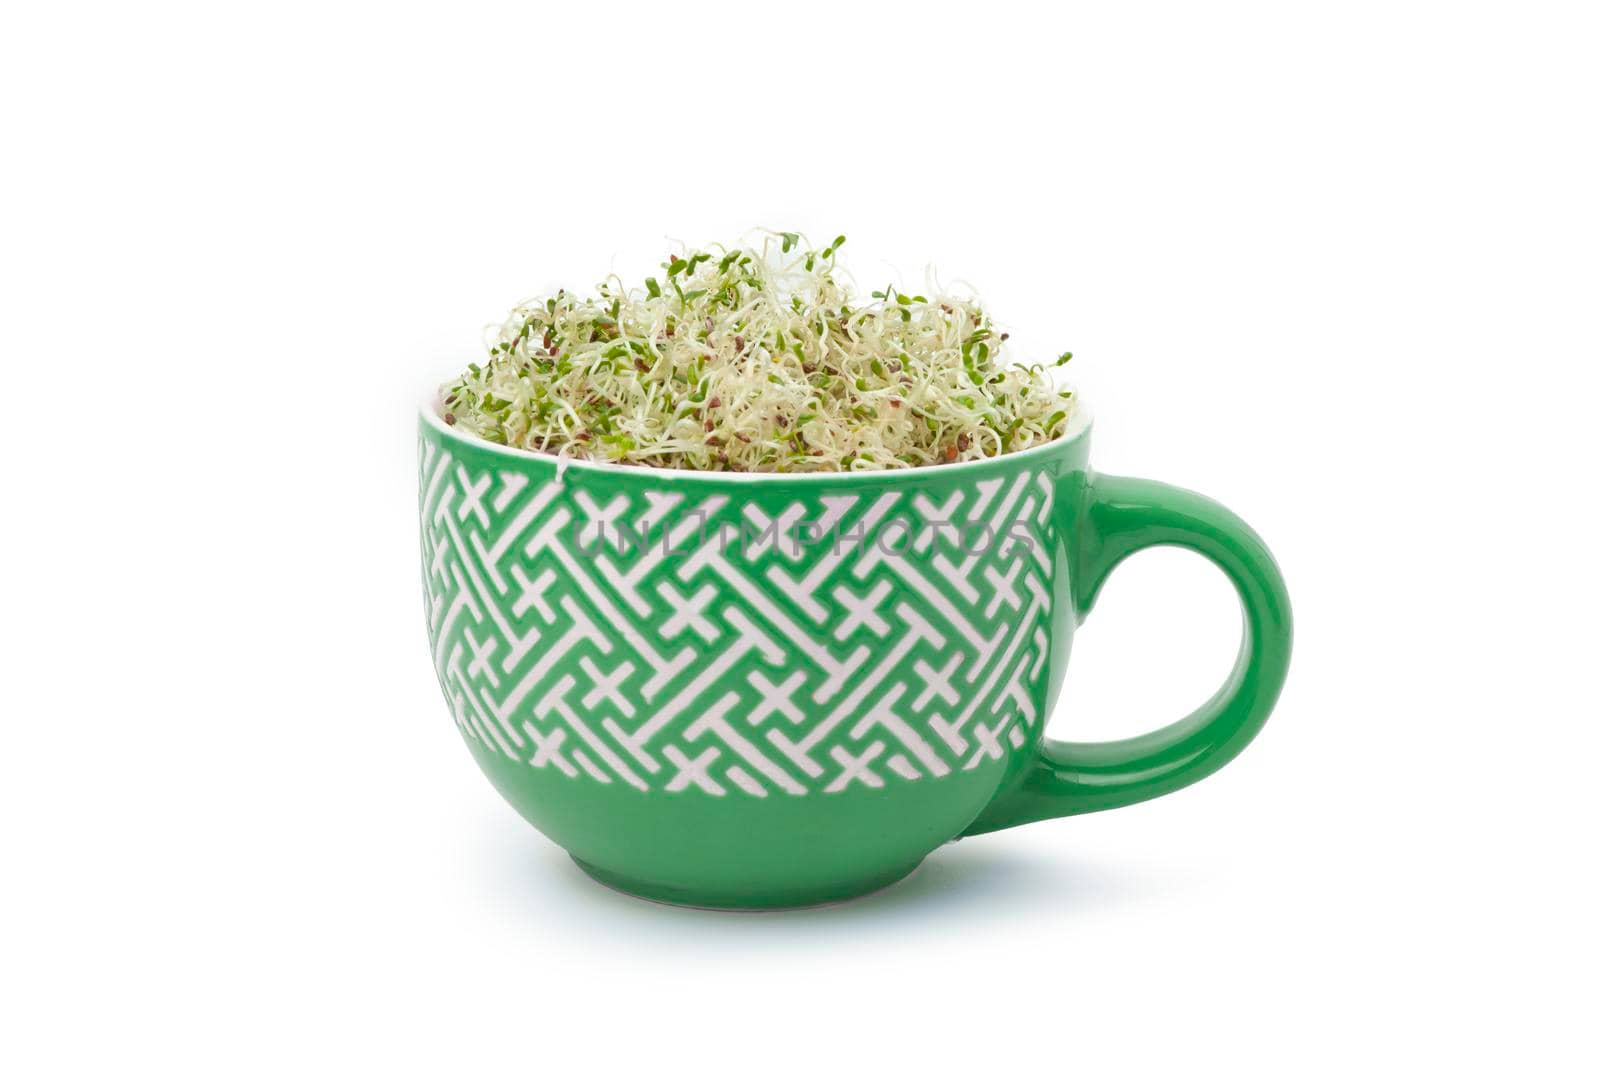 Organic young alfalfa sprouts in a cup on a white background by SlayCer